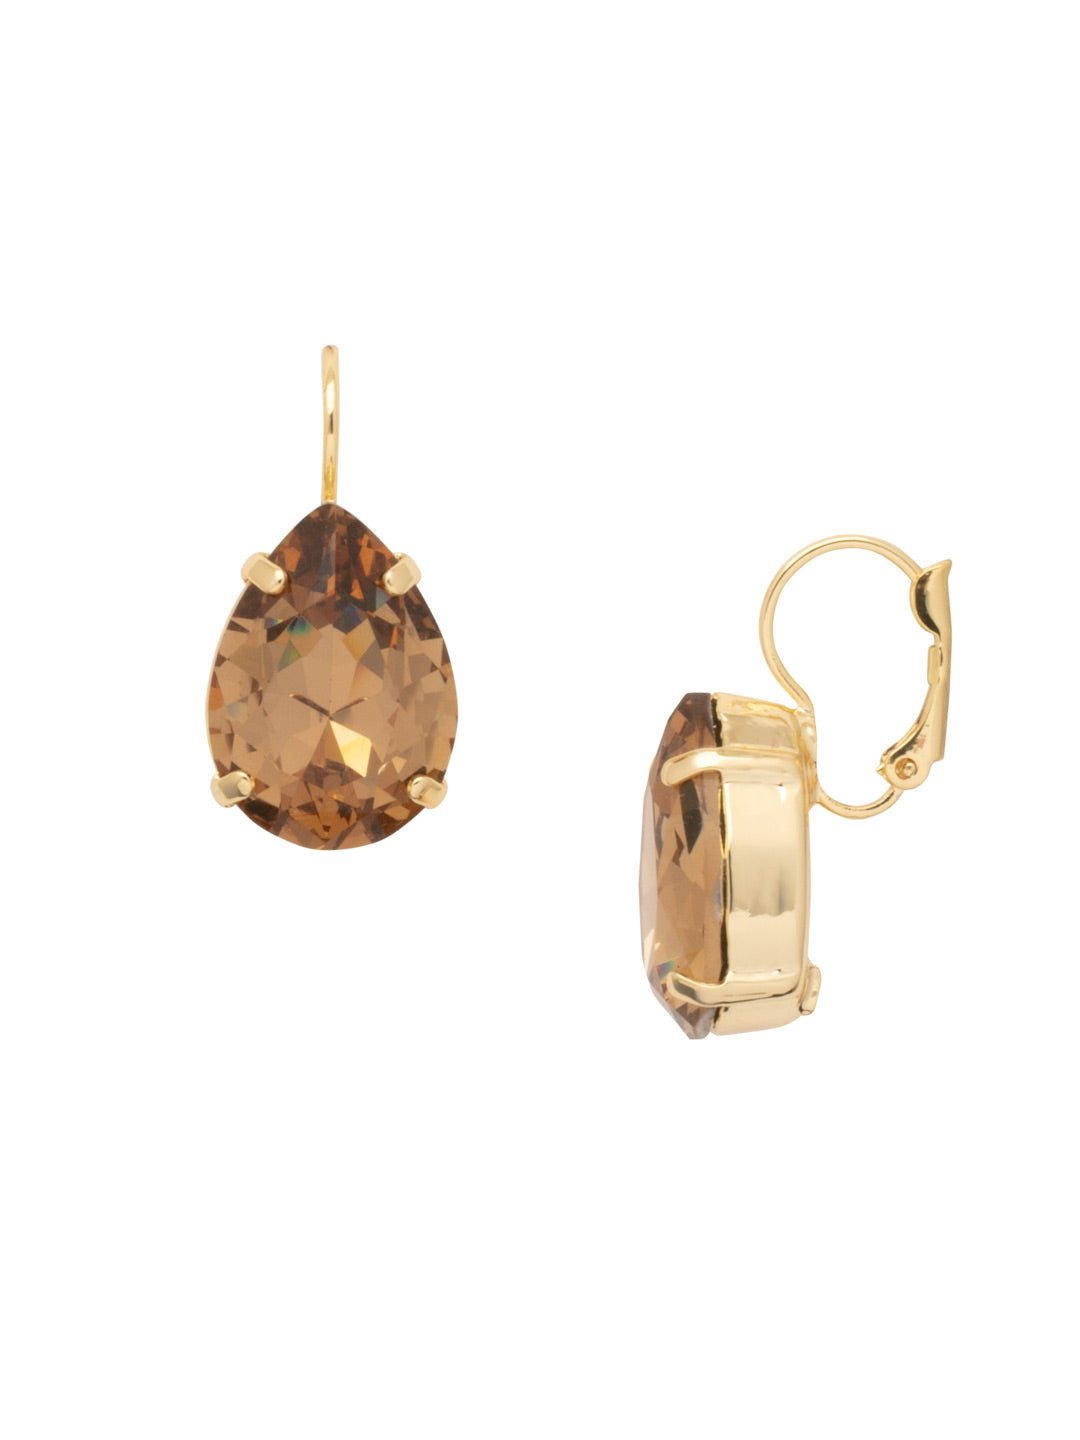 Eileen Dangle Earrings - EFF101BGLC - <p>The Eileen Dangle Earrings feature a single pear cut candy gem crystal dangling from a lever back French wire. From Sorrelli's Light Colorado collection in our Bright Gold-tone finish.</p>